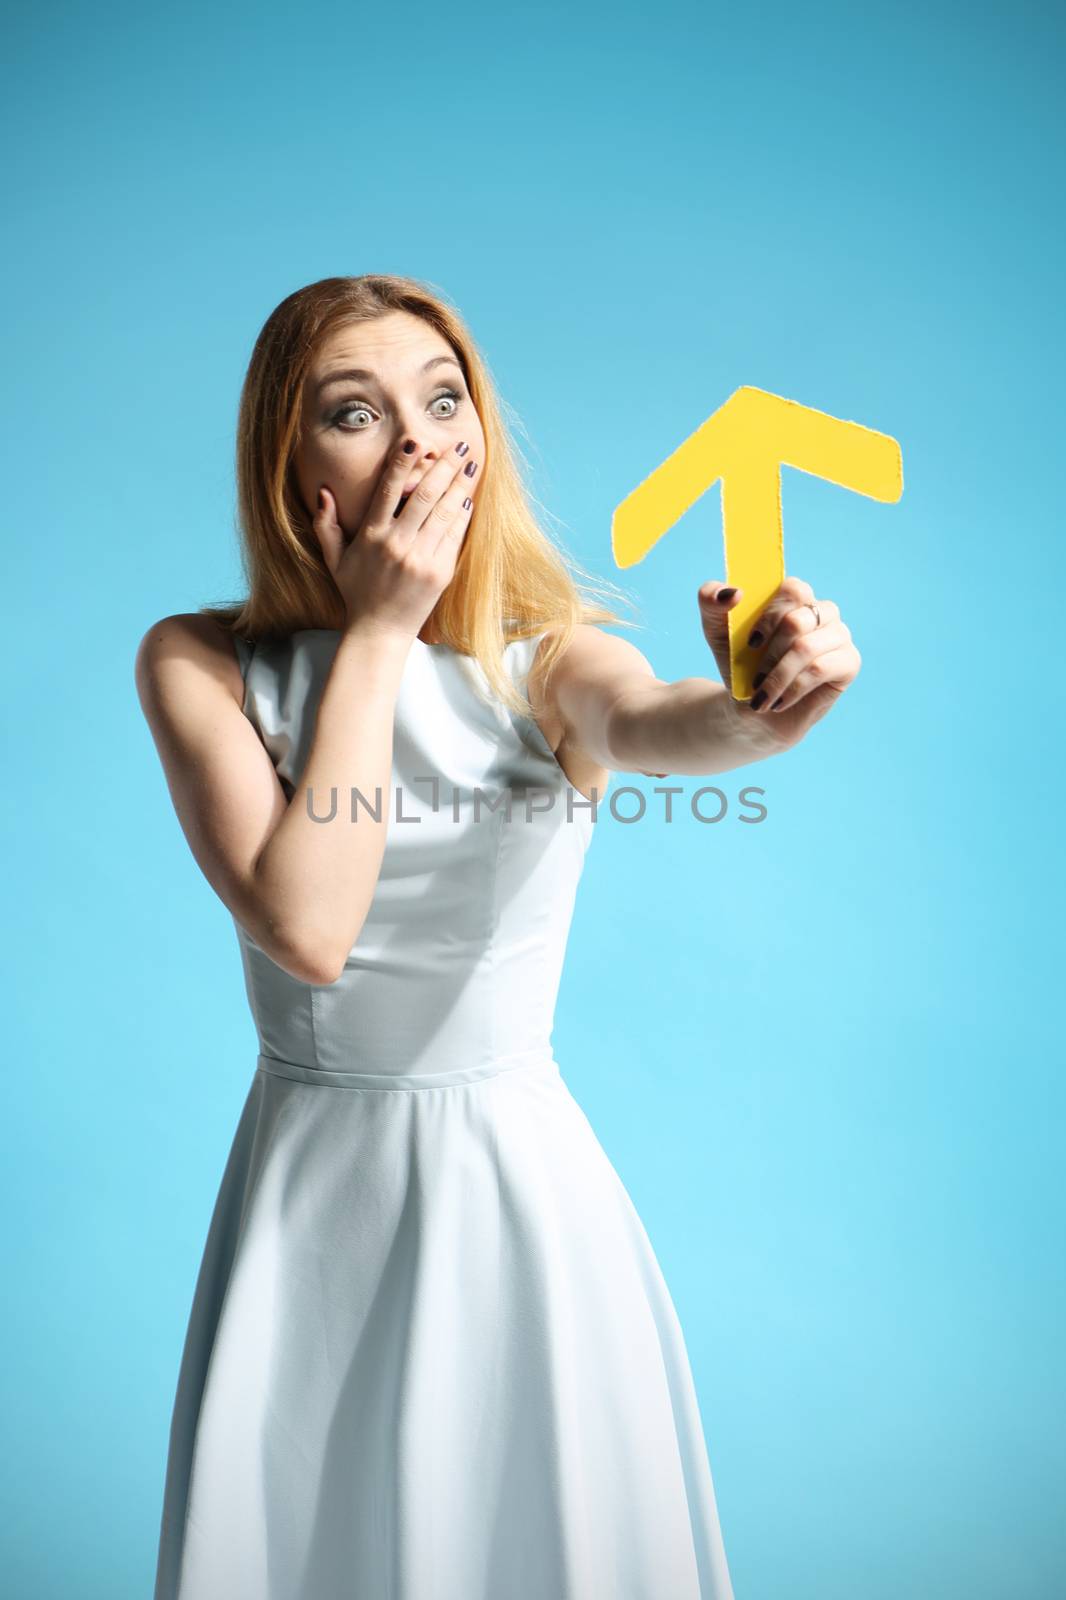 Beautiful girl in a white dress holding an arrow